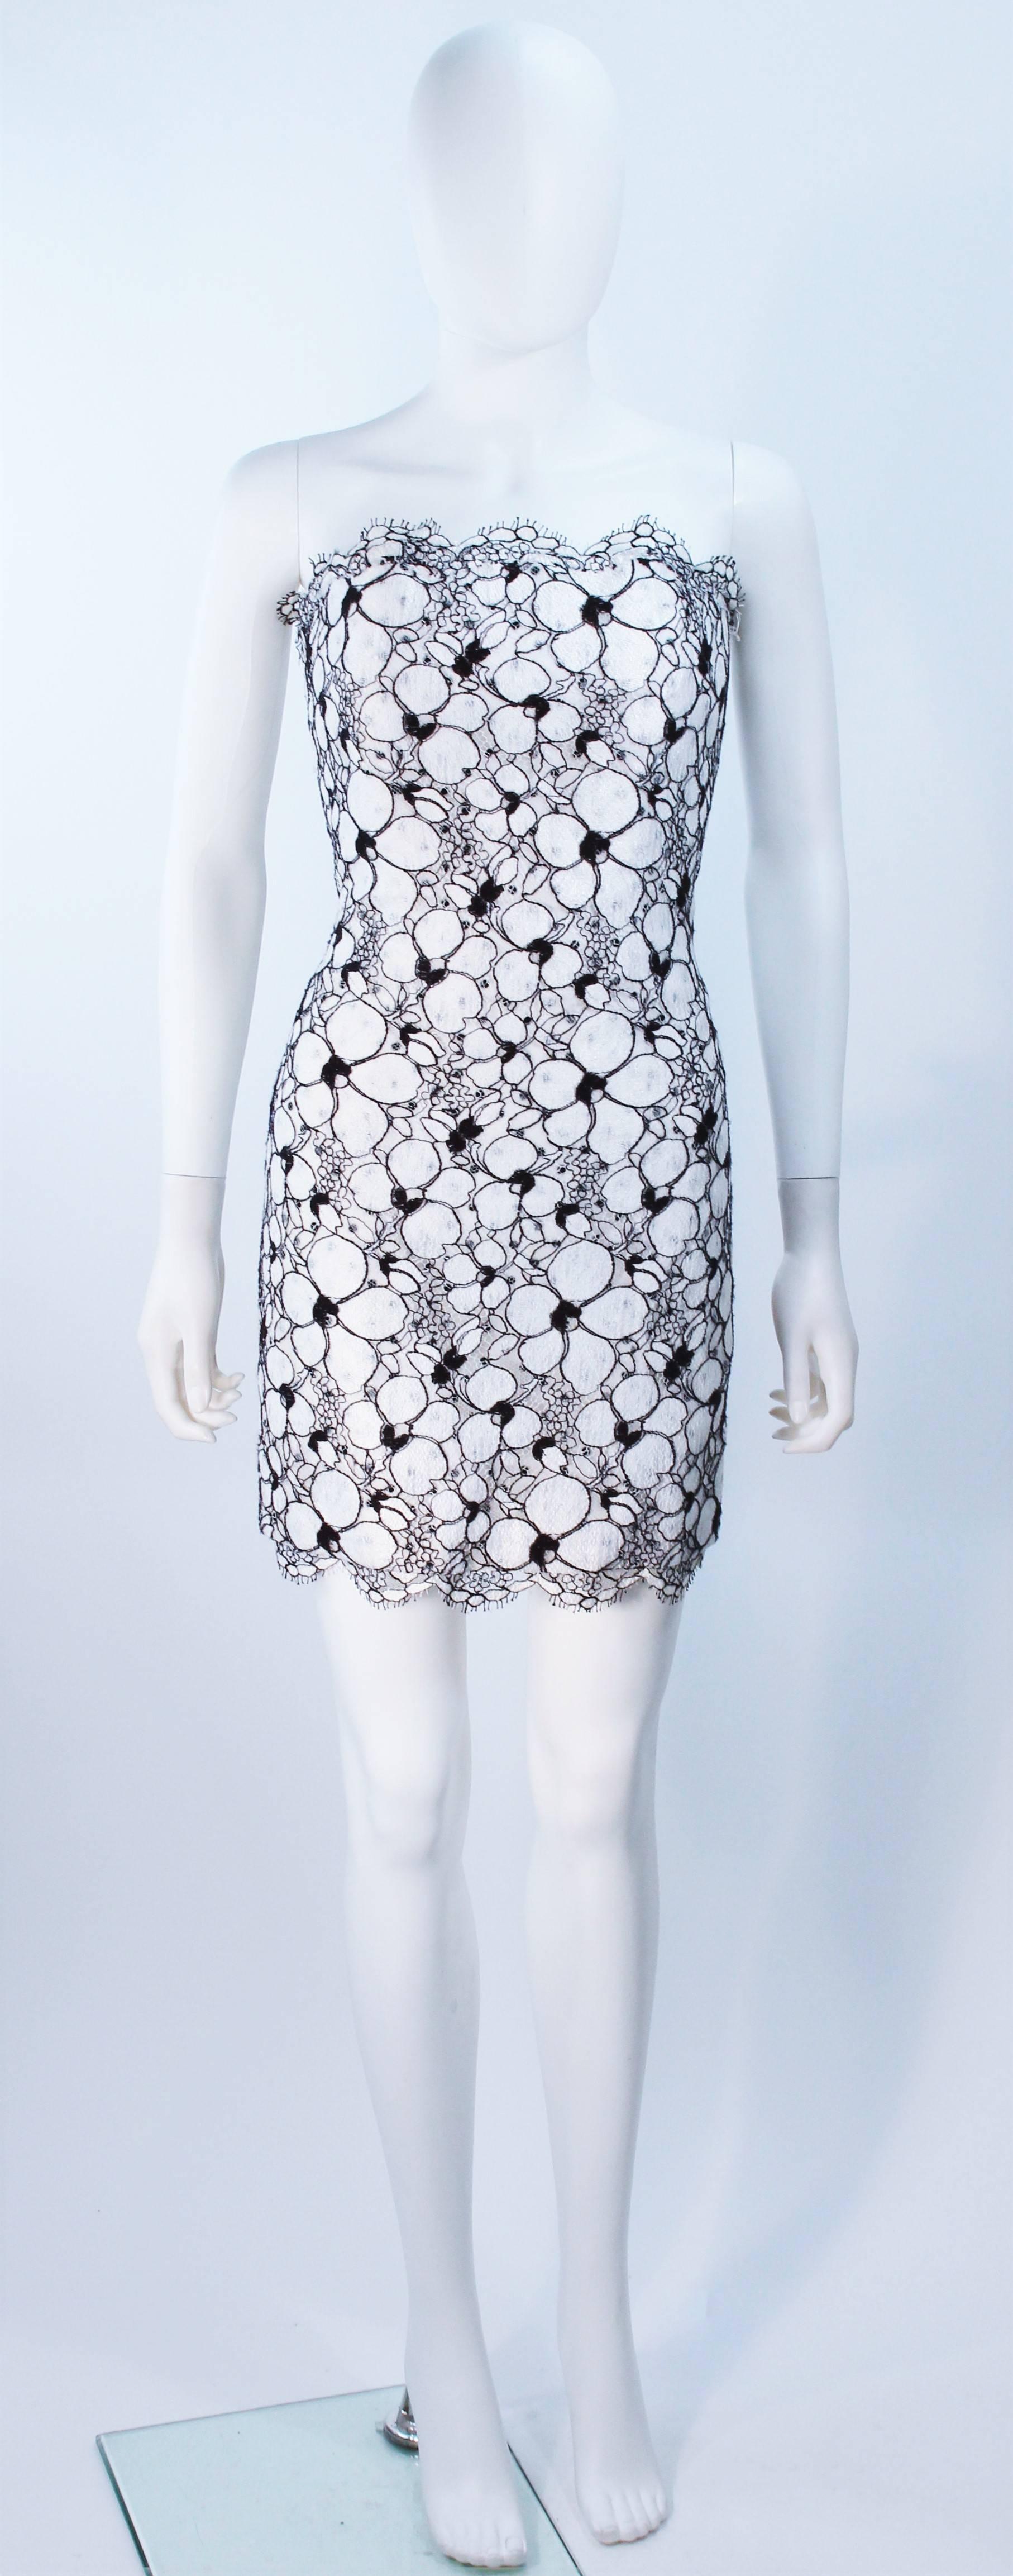  This Fred Hayman dress is composed of a black and white floral fabric with scallop edges. There is a center back zipper closure and interior boning. In excellent vintage condition. 

  **Please cross-reference measurements for personal accuracy.